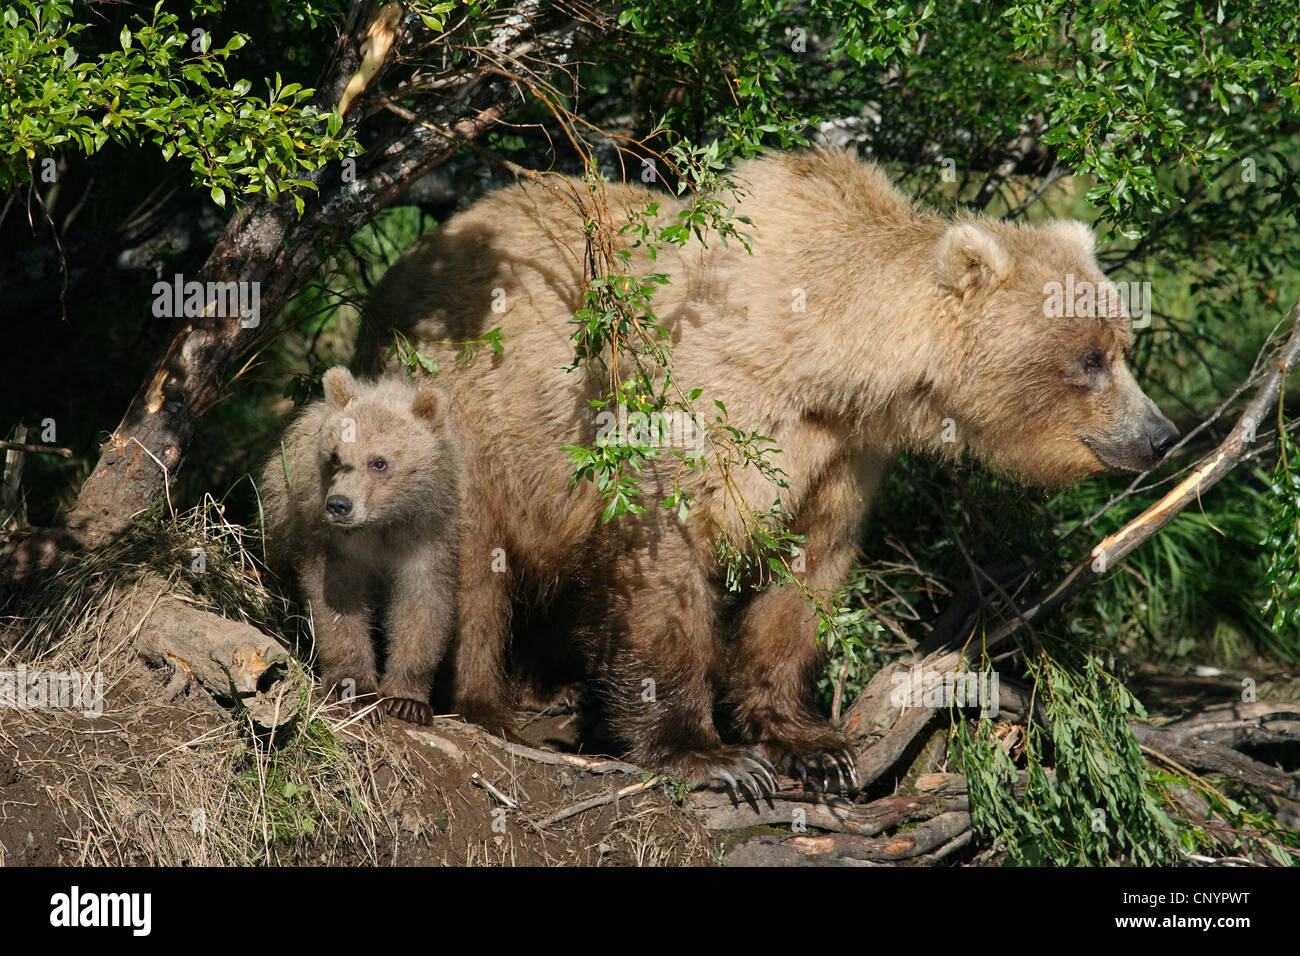 brown bear, grizzly bear, grizzly (Ursus arctos horribilis), female standing at a riverside with a juvenile, USA, Alaska Stock Photo